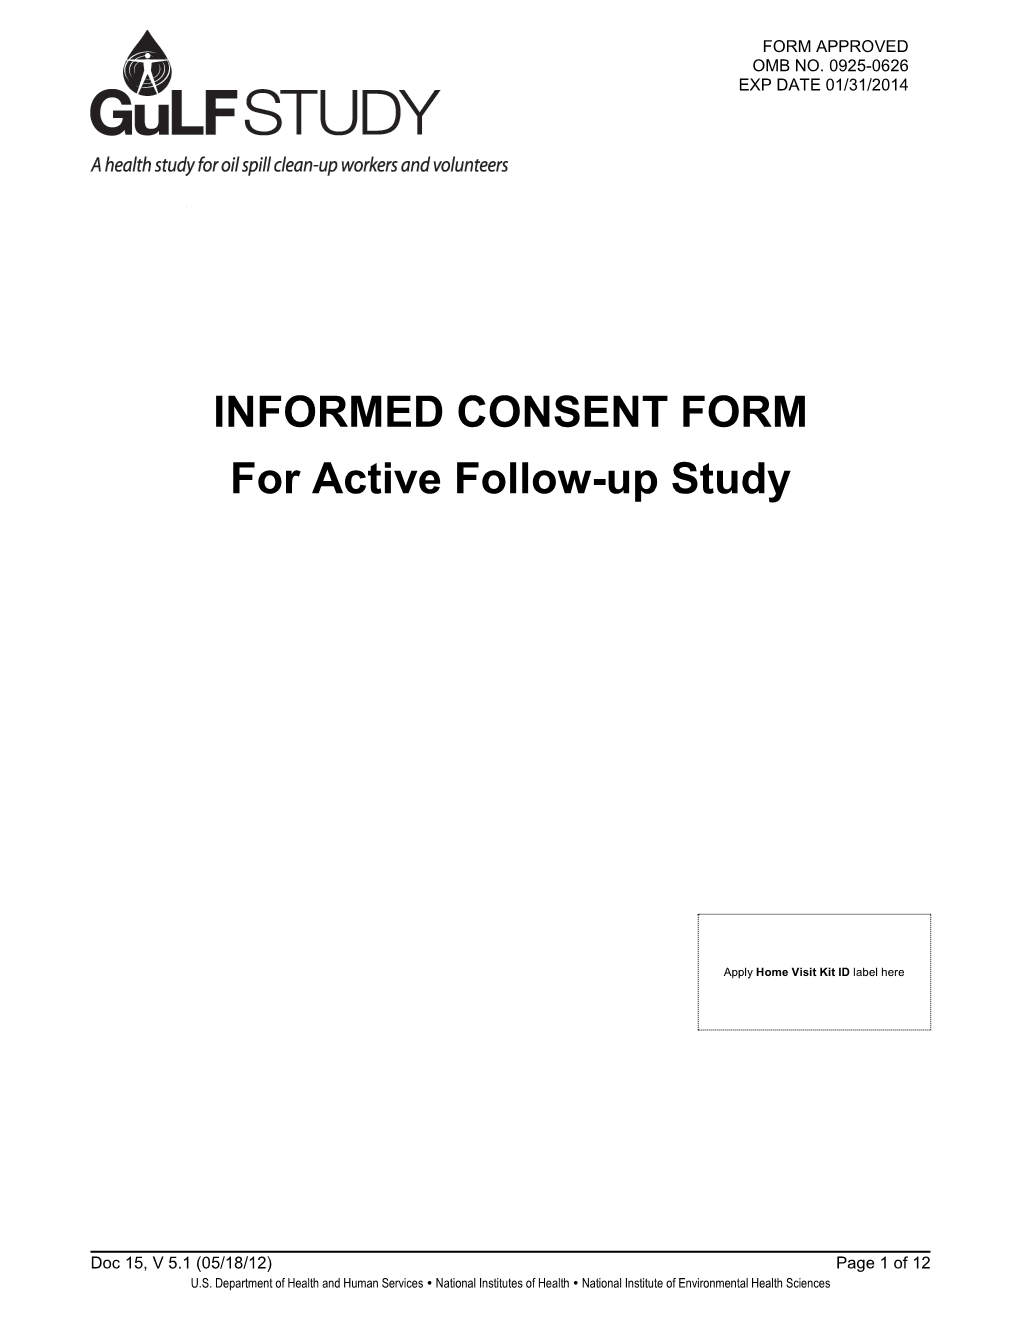 Gulf STUDY Informed Consent Form Booklet